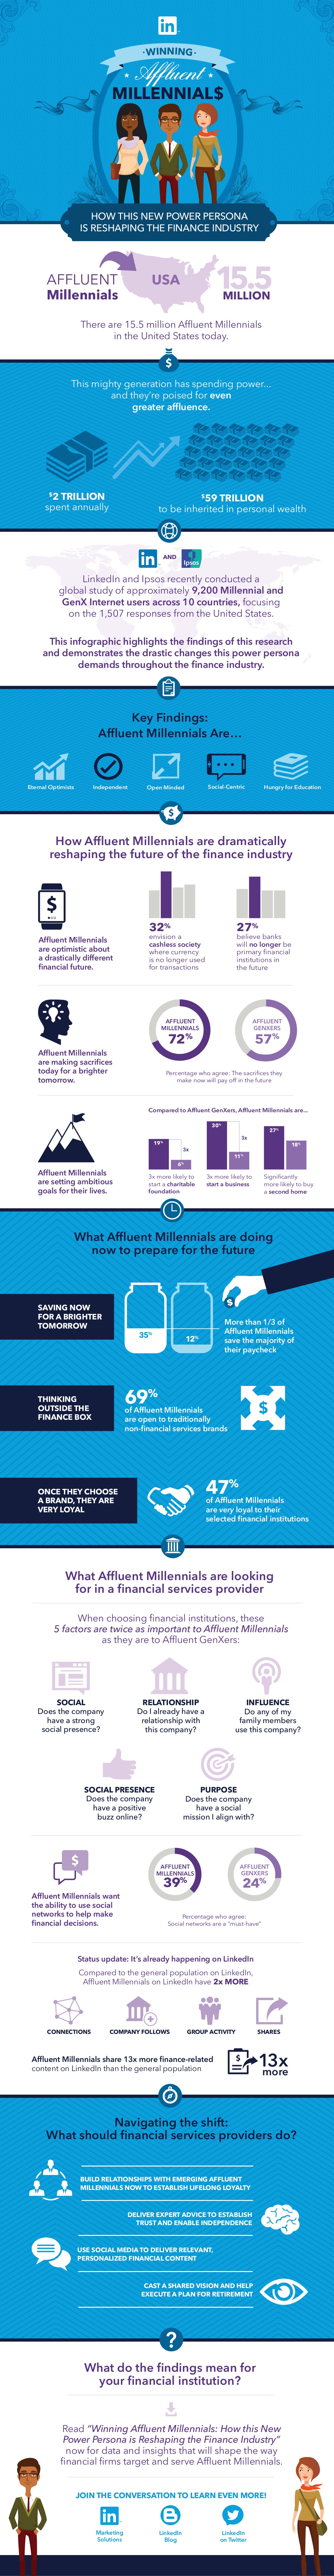 How Affluent Millennials are Changing the Finance Industry